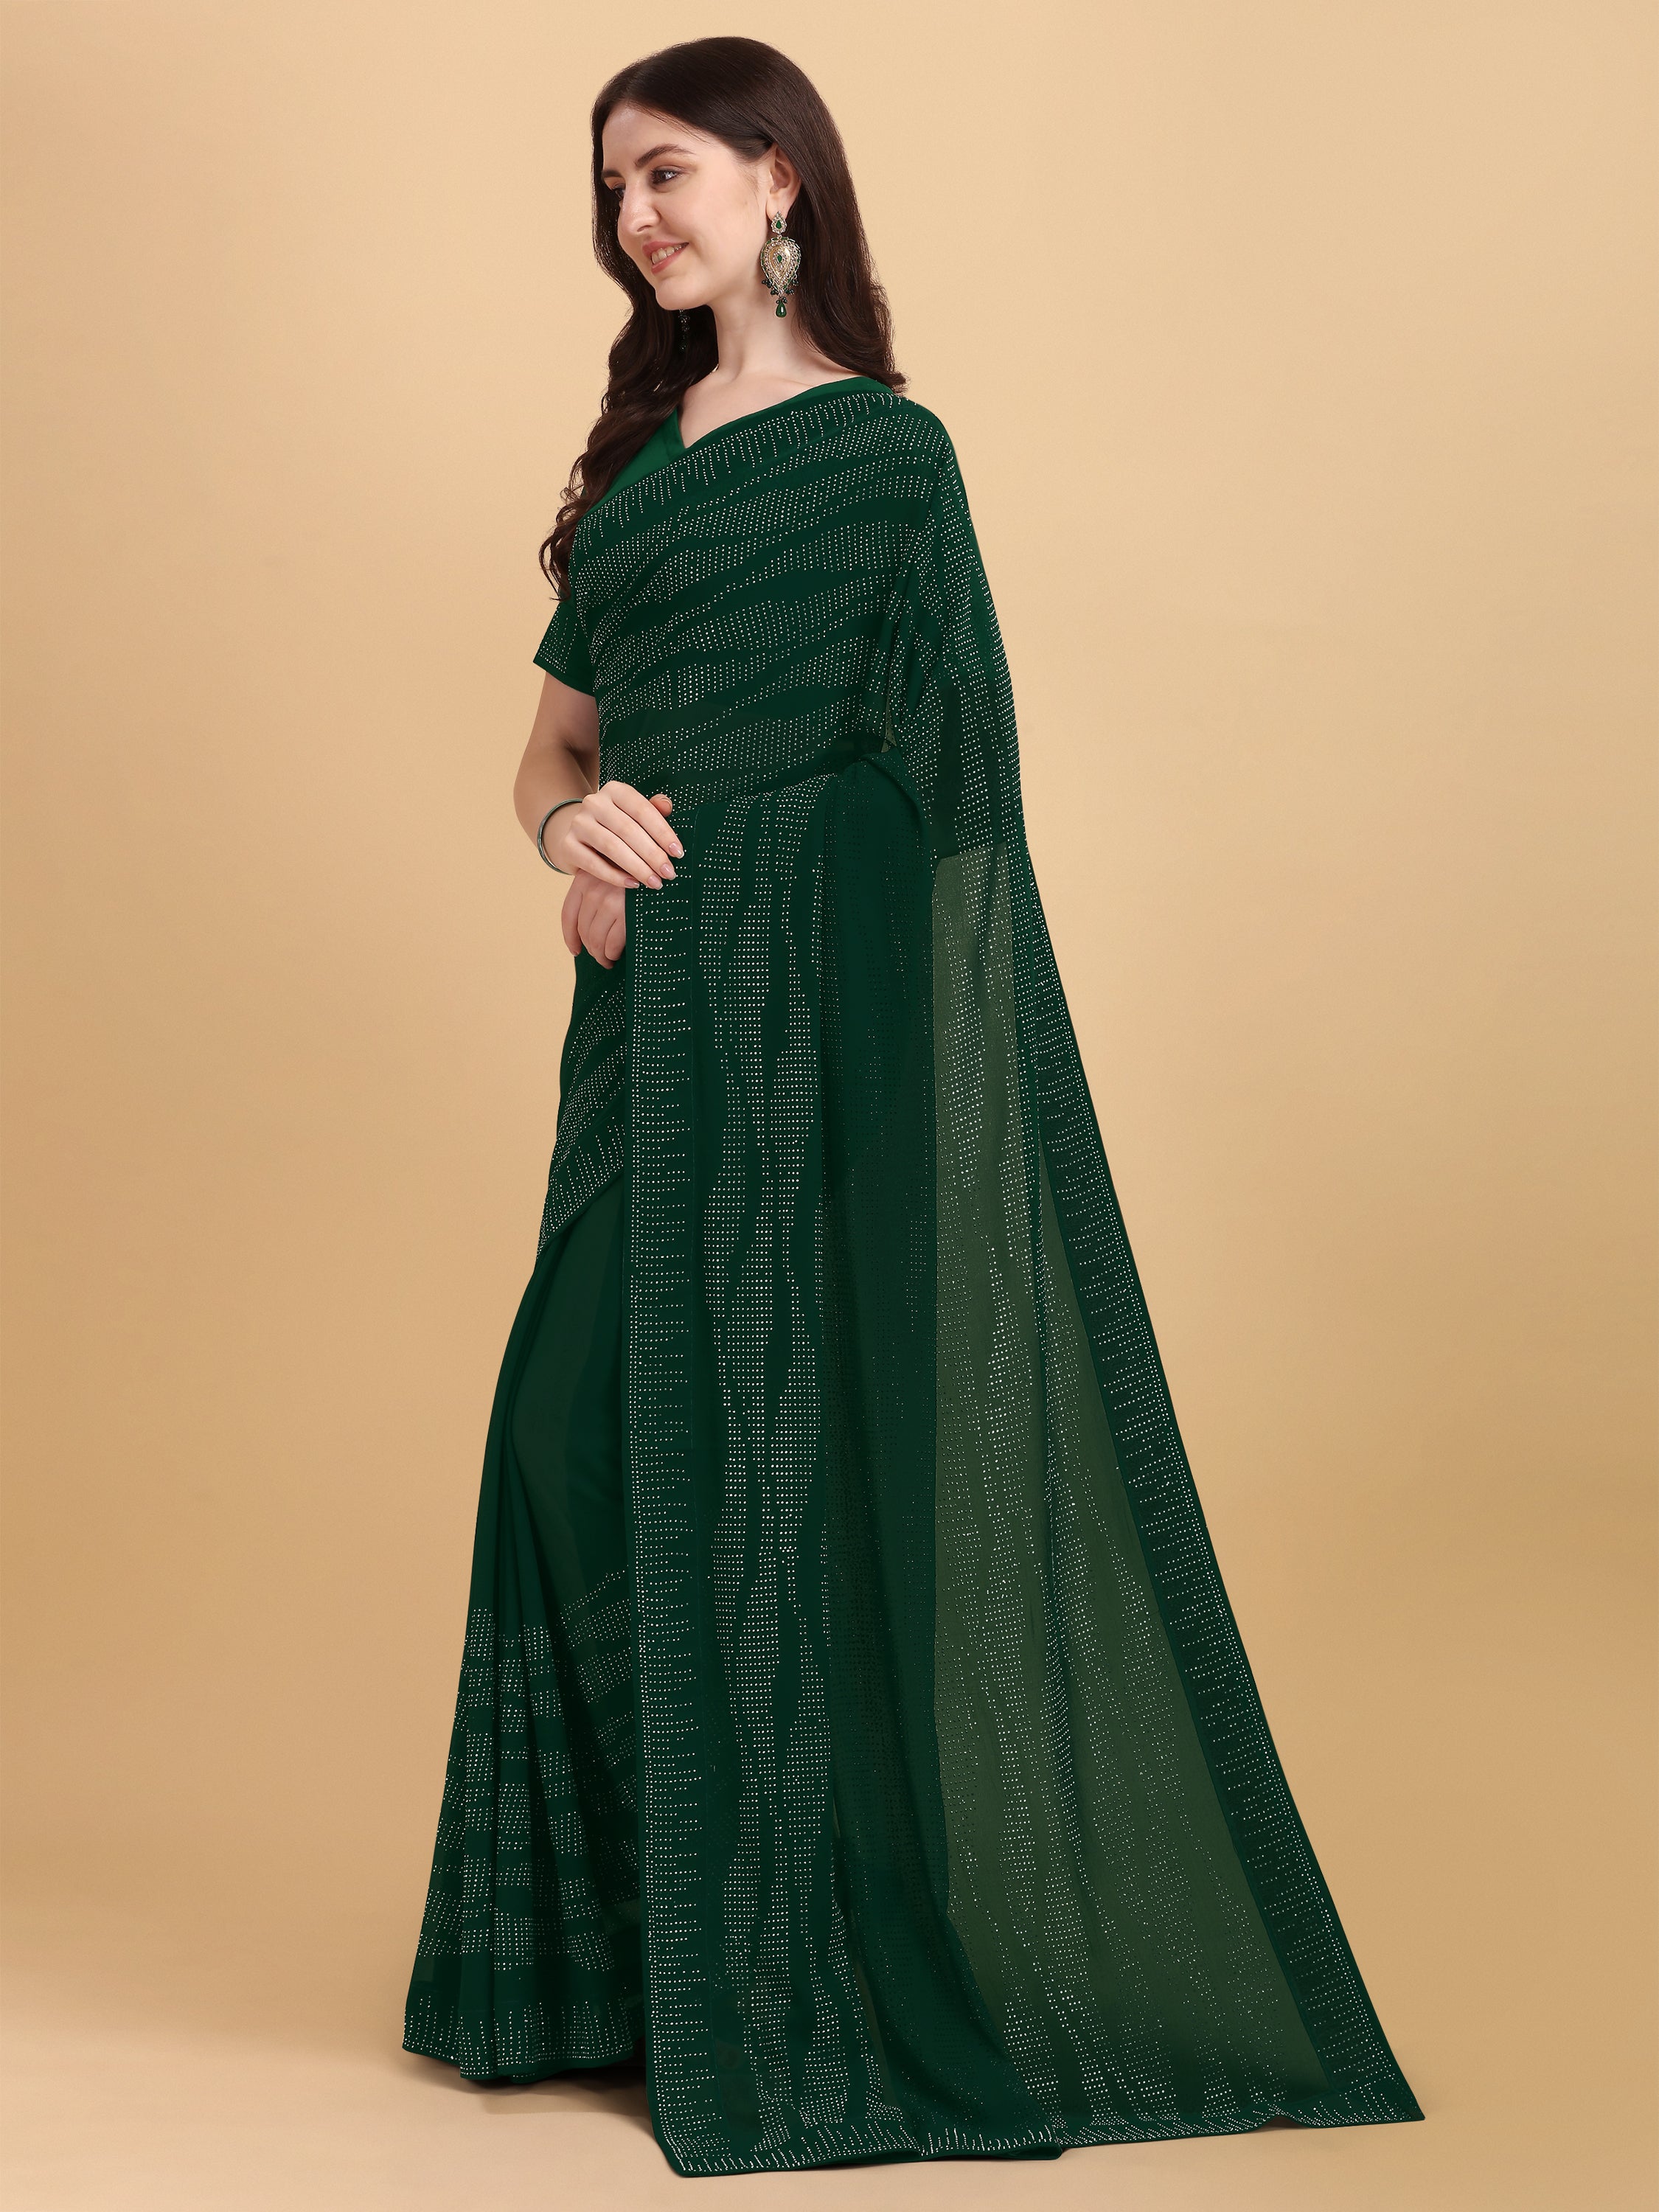 Women's Emblishment Occasion Wear Georgette Saree With Blouse Piece (Green) - NIMIDHYA